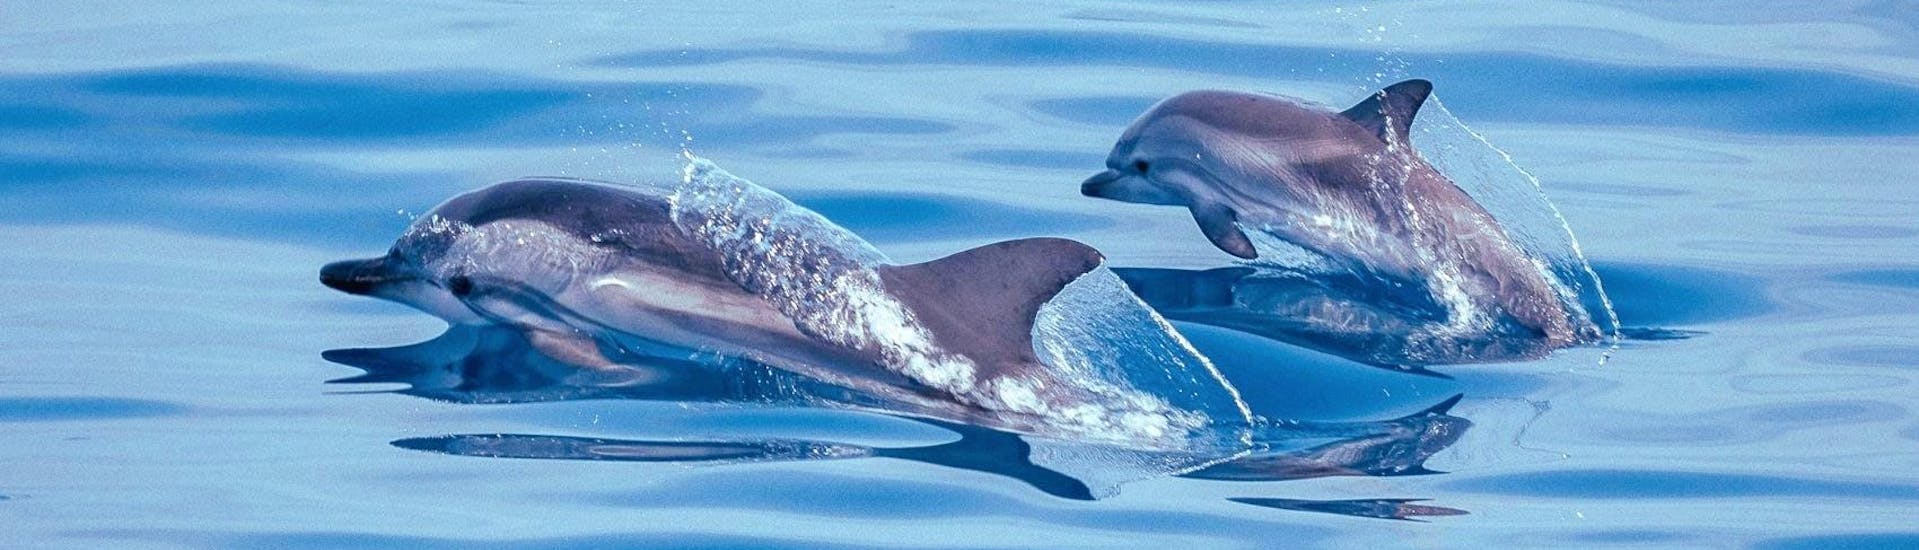 Dolphins you can see during the Boat Trip to Antibes with Snorkeling & Wildlife Watching with BeFree2Dive.